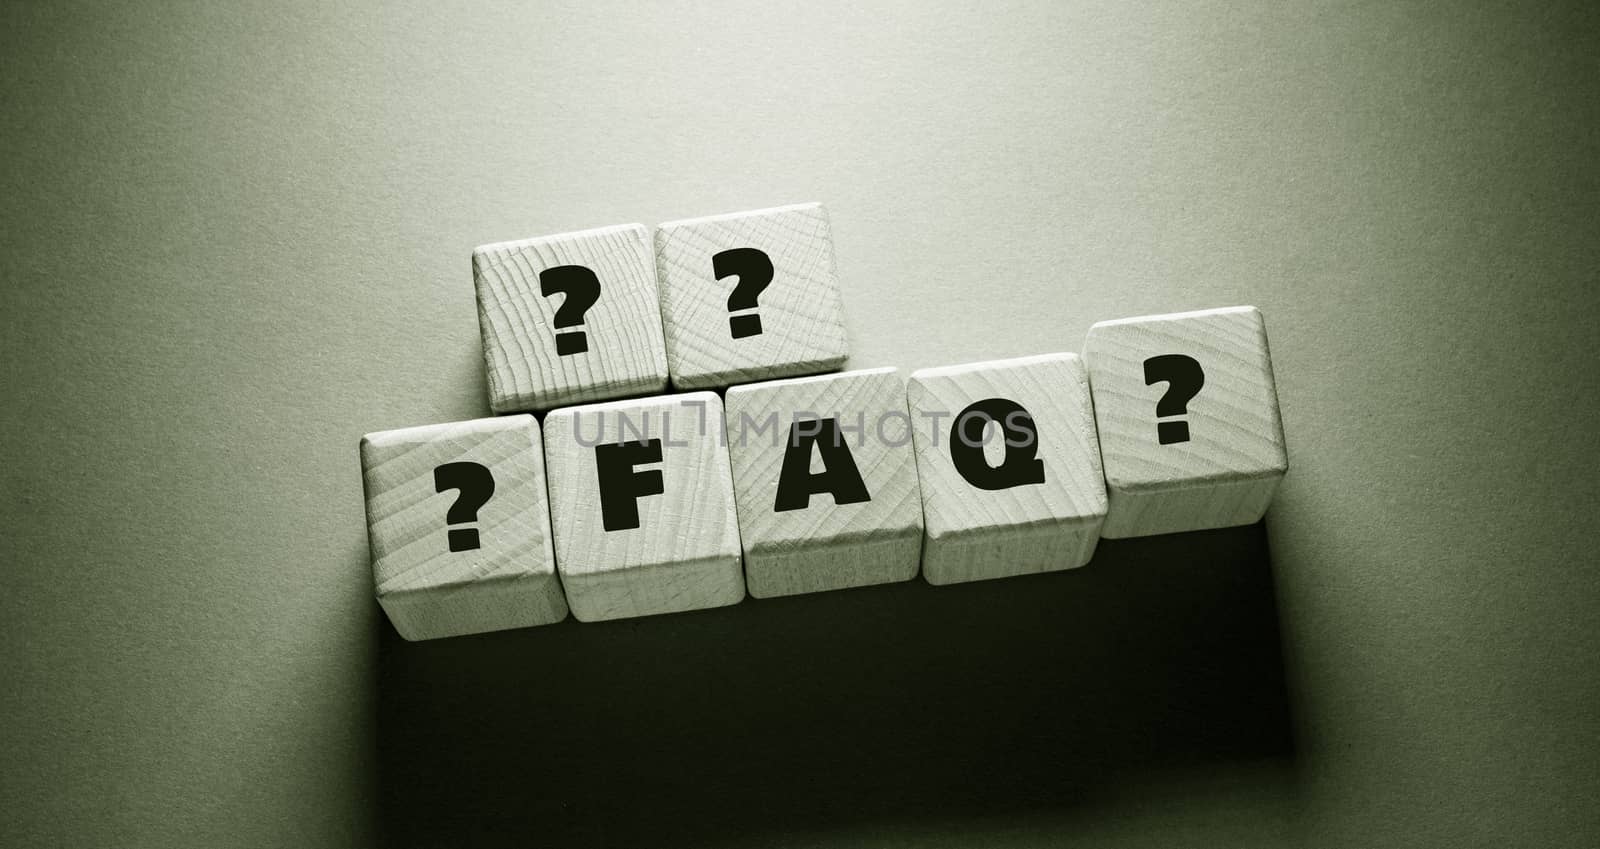 Faq Word with Wooden Cubes by Jievani